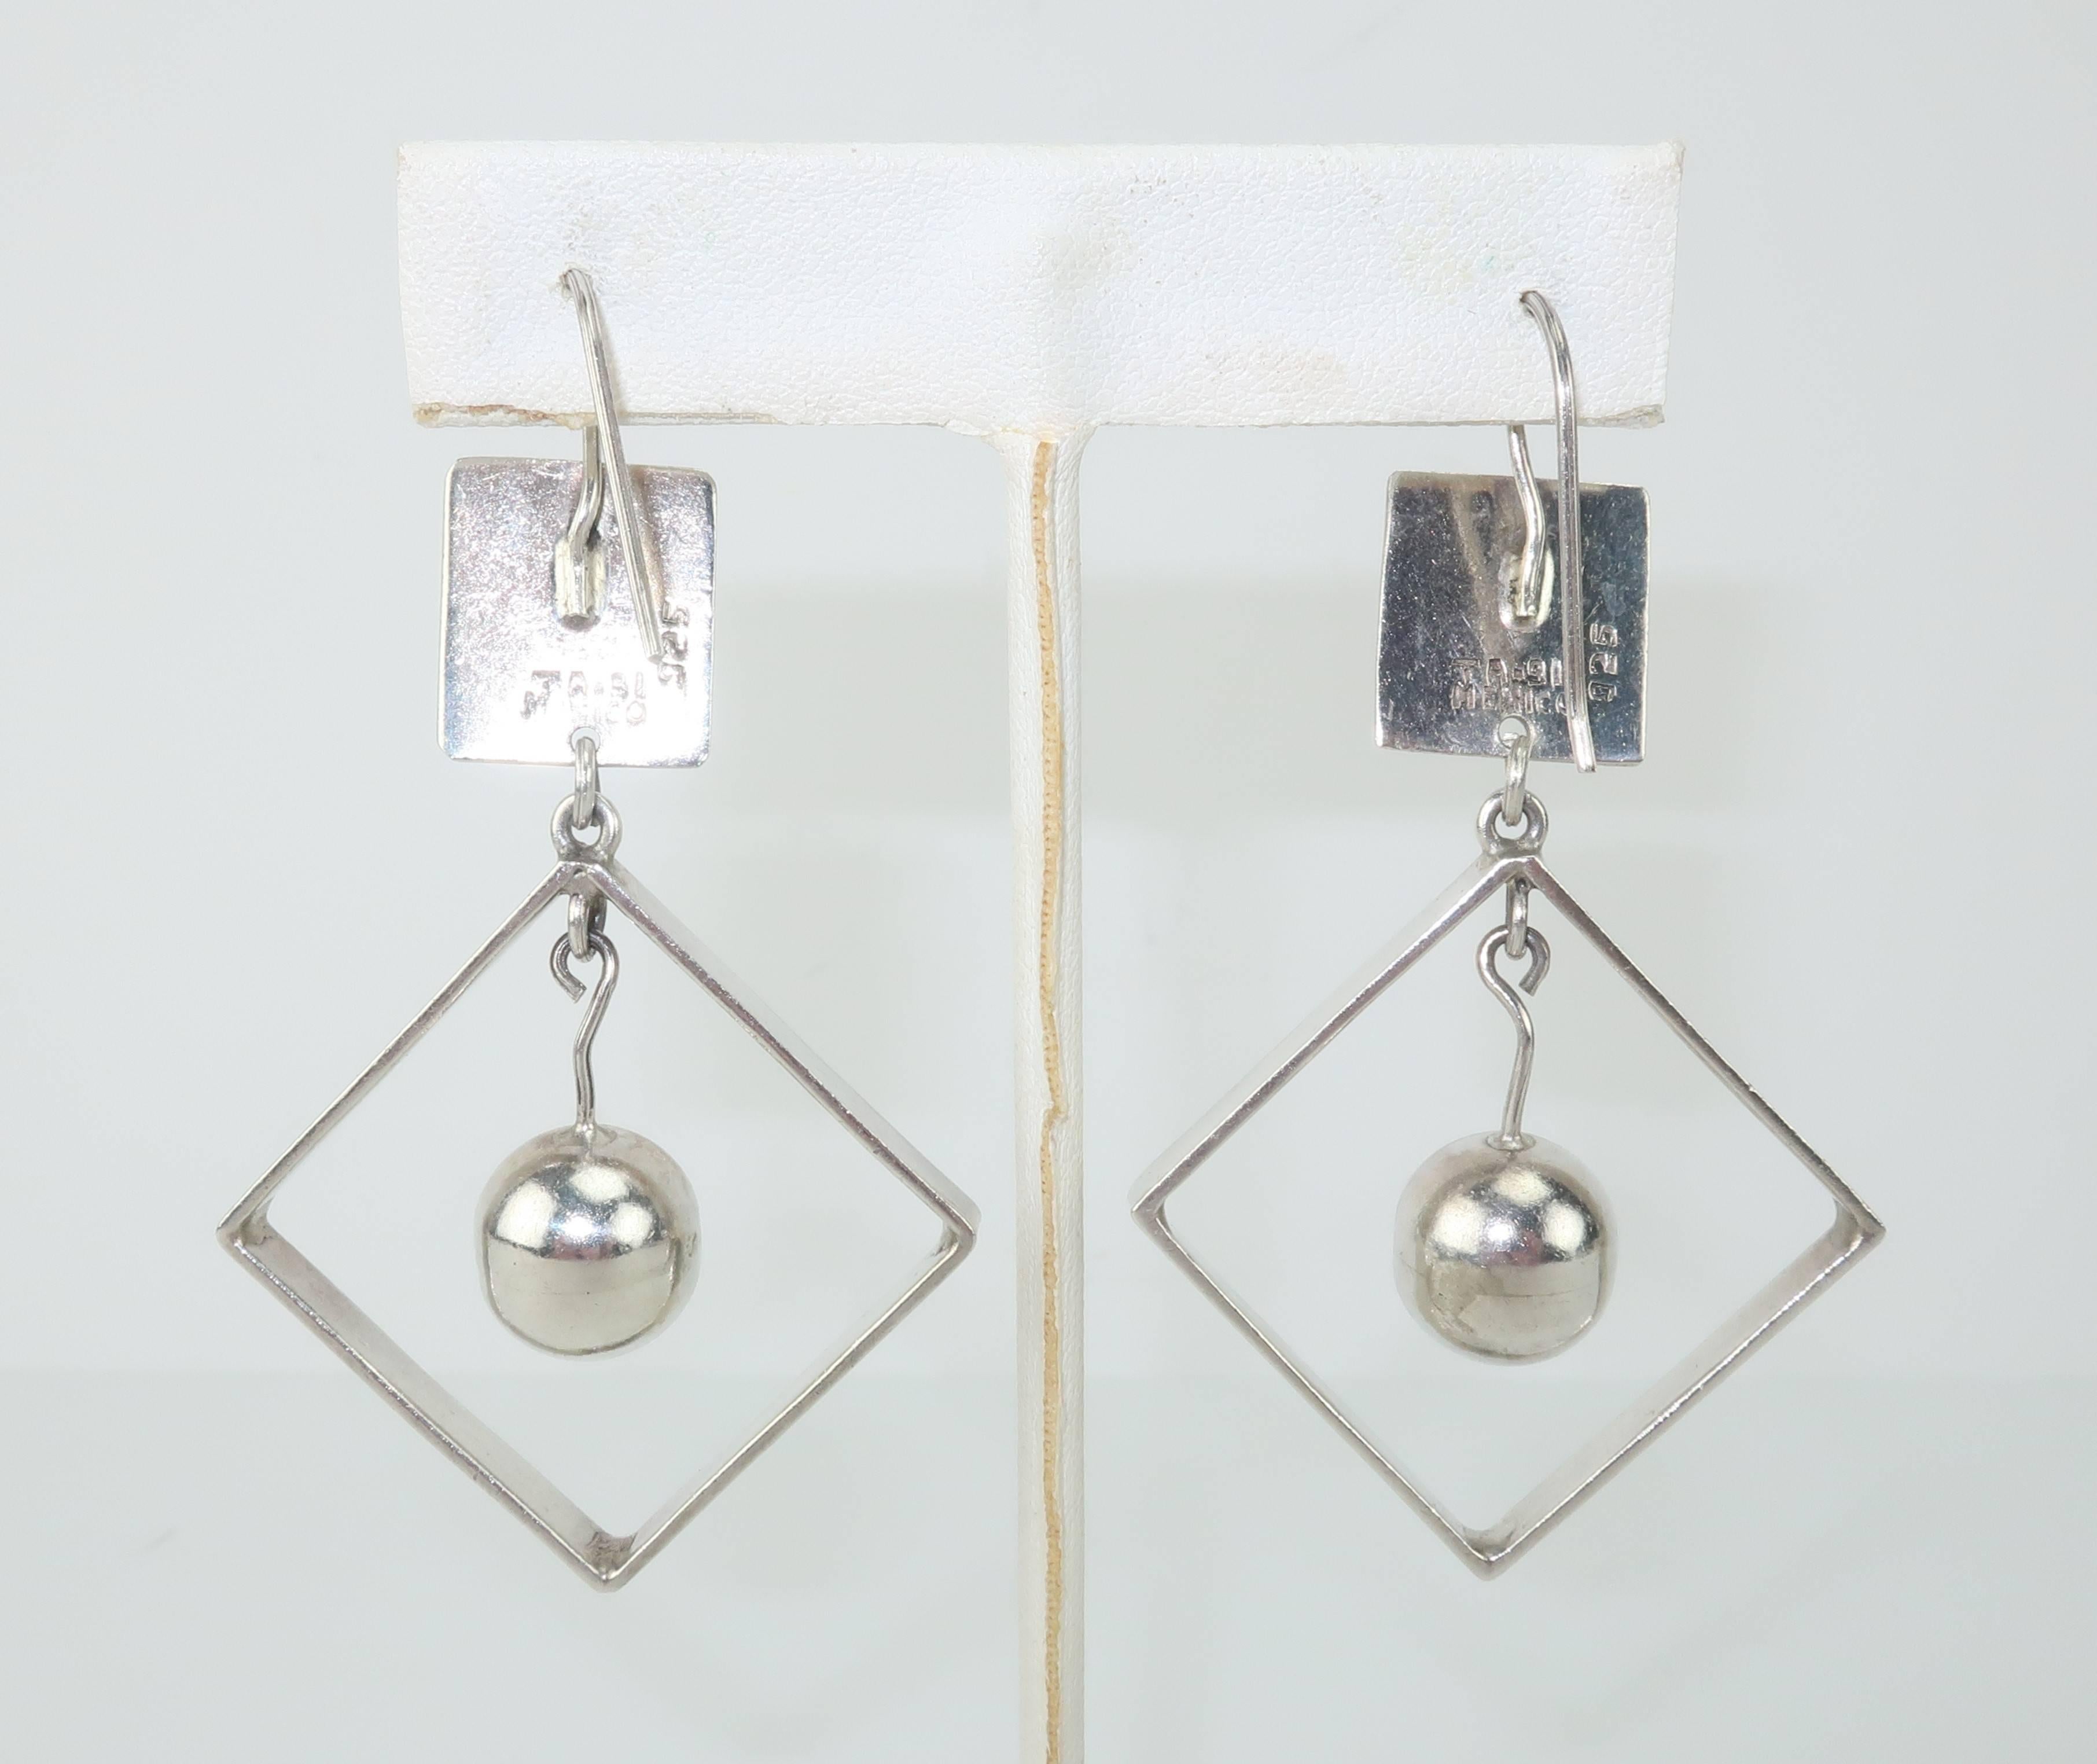 Modernist Vintage Sterling Silver Taxco Mexico Geometric Earrings